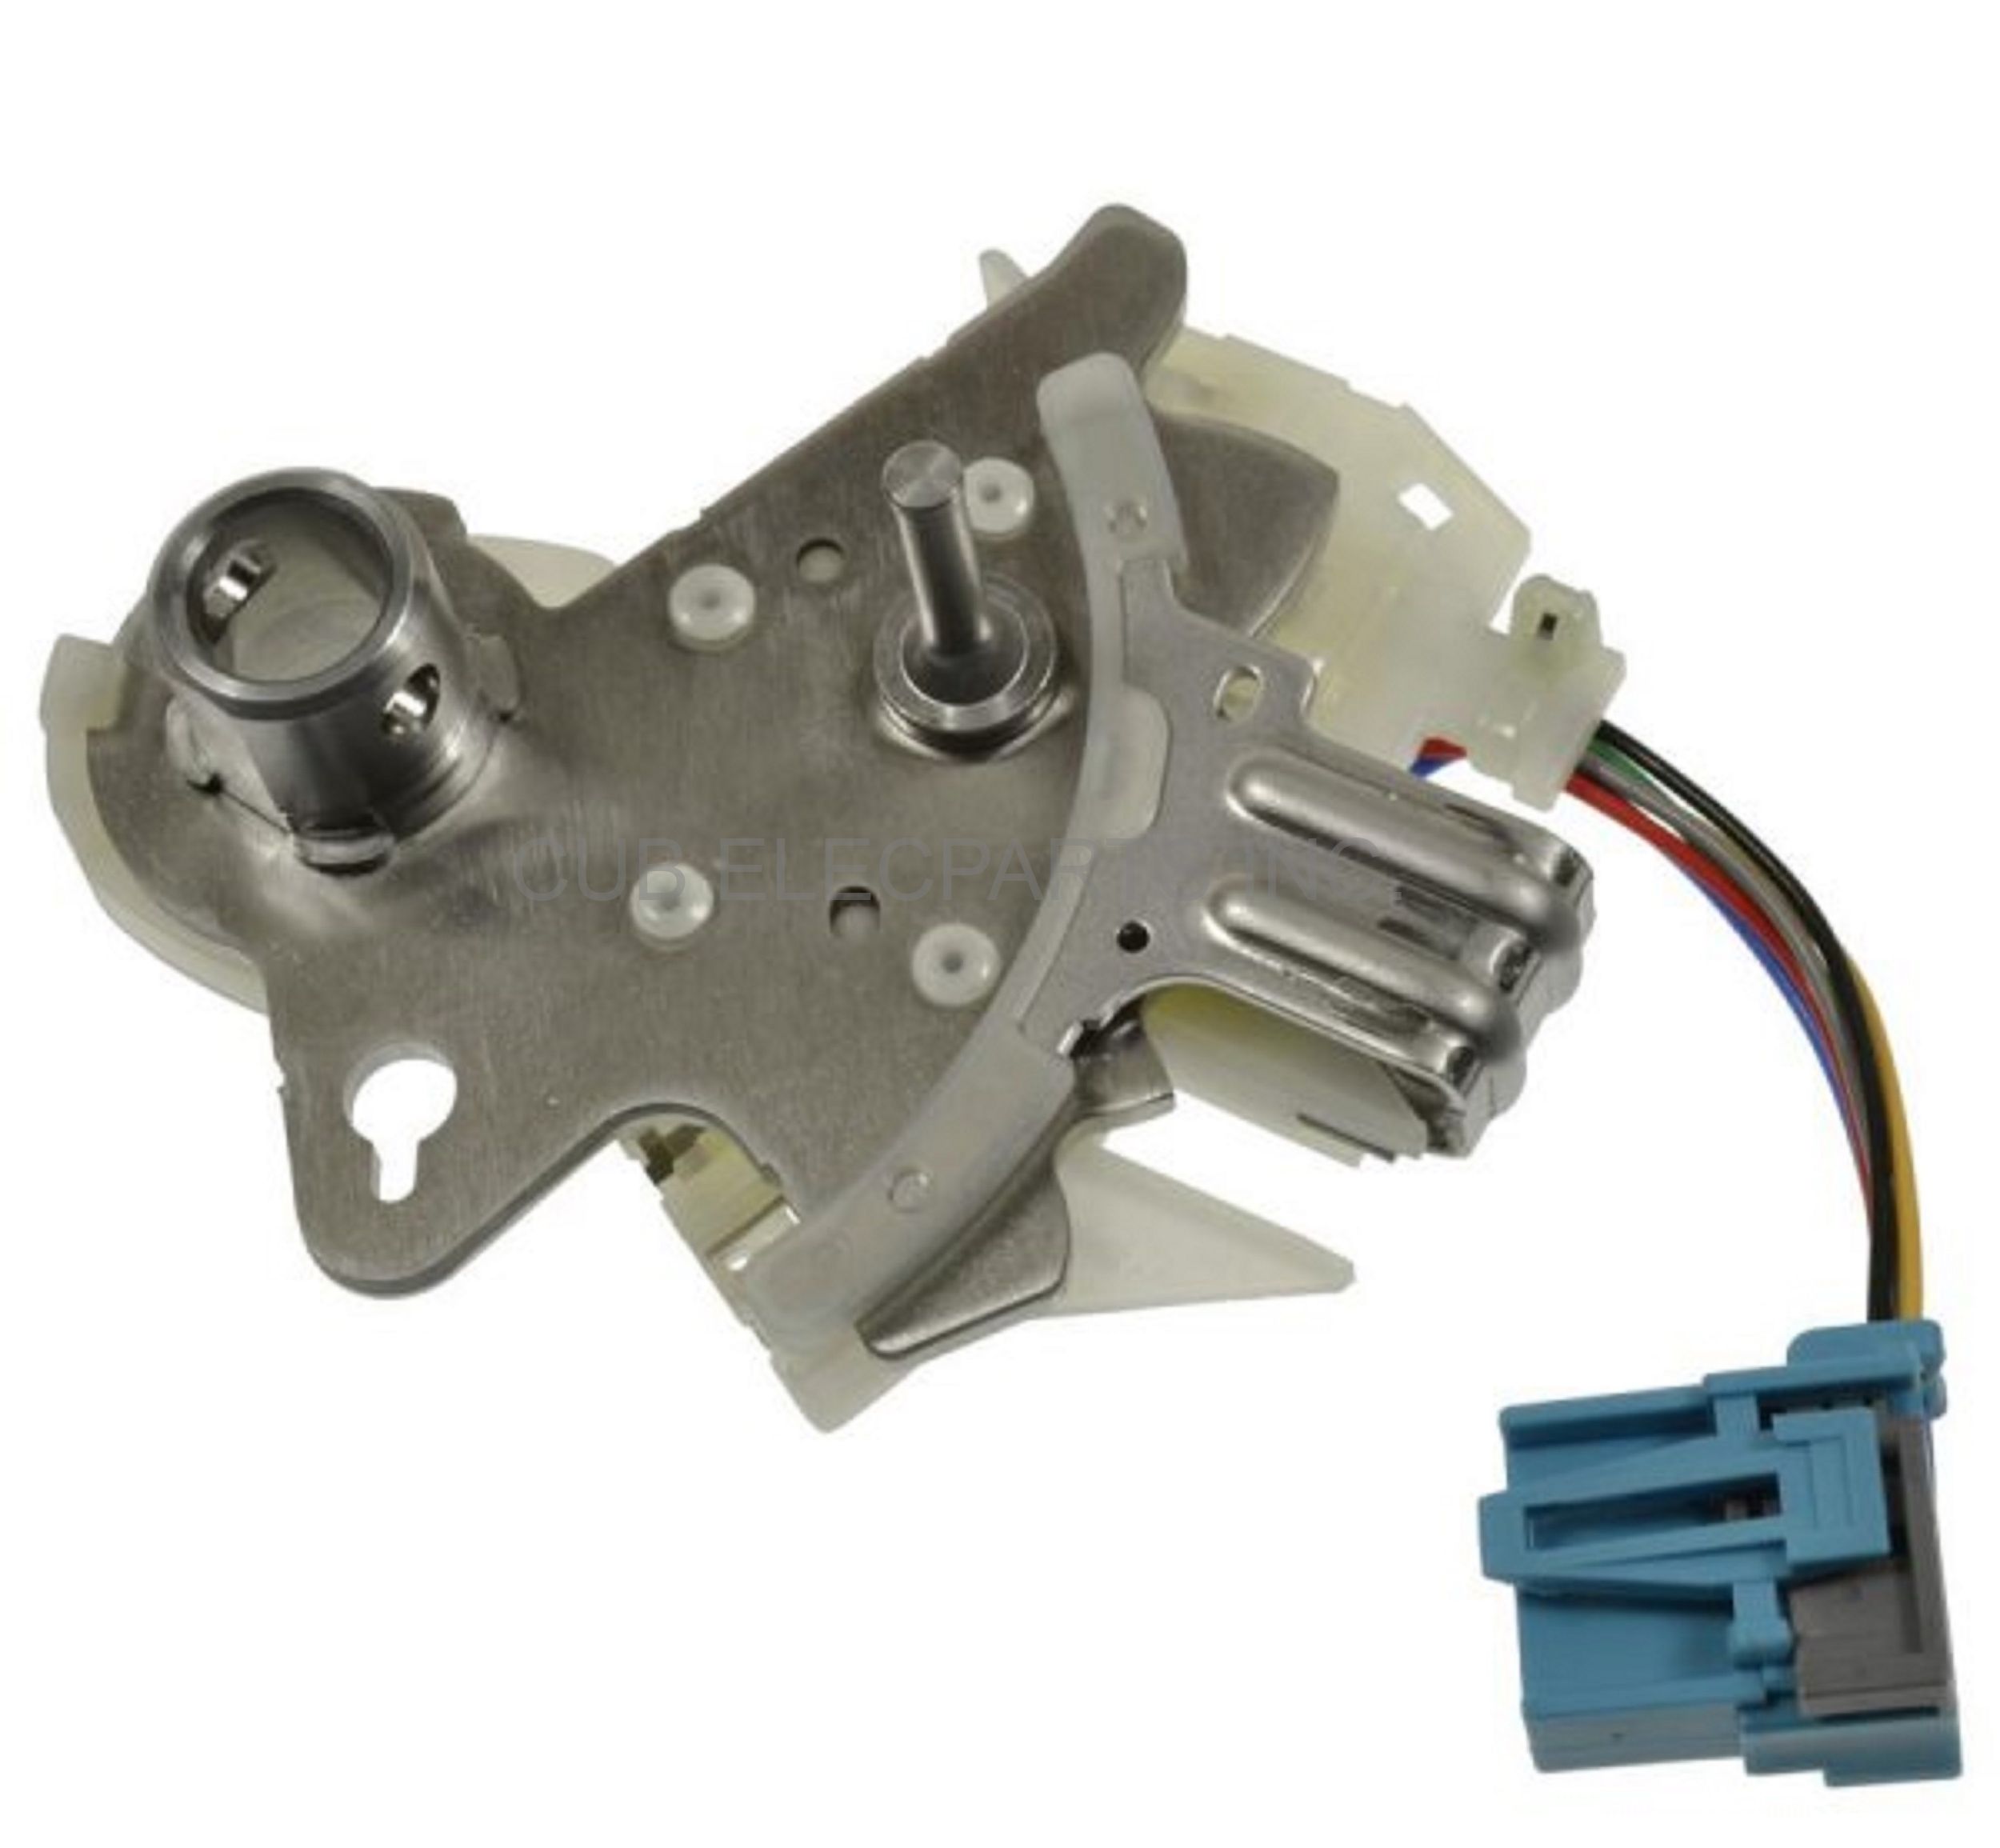 VS-31A082 / B023-073 NEUTRAL SAFETY SWITCH Wells:SW6125 